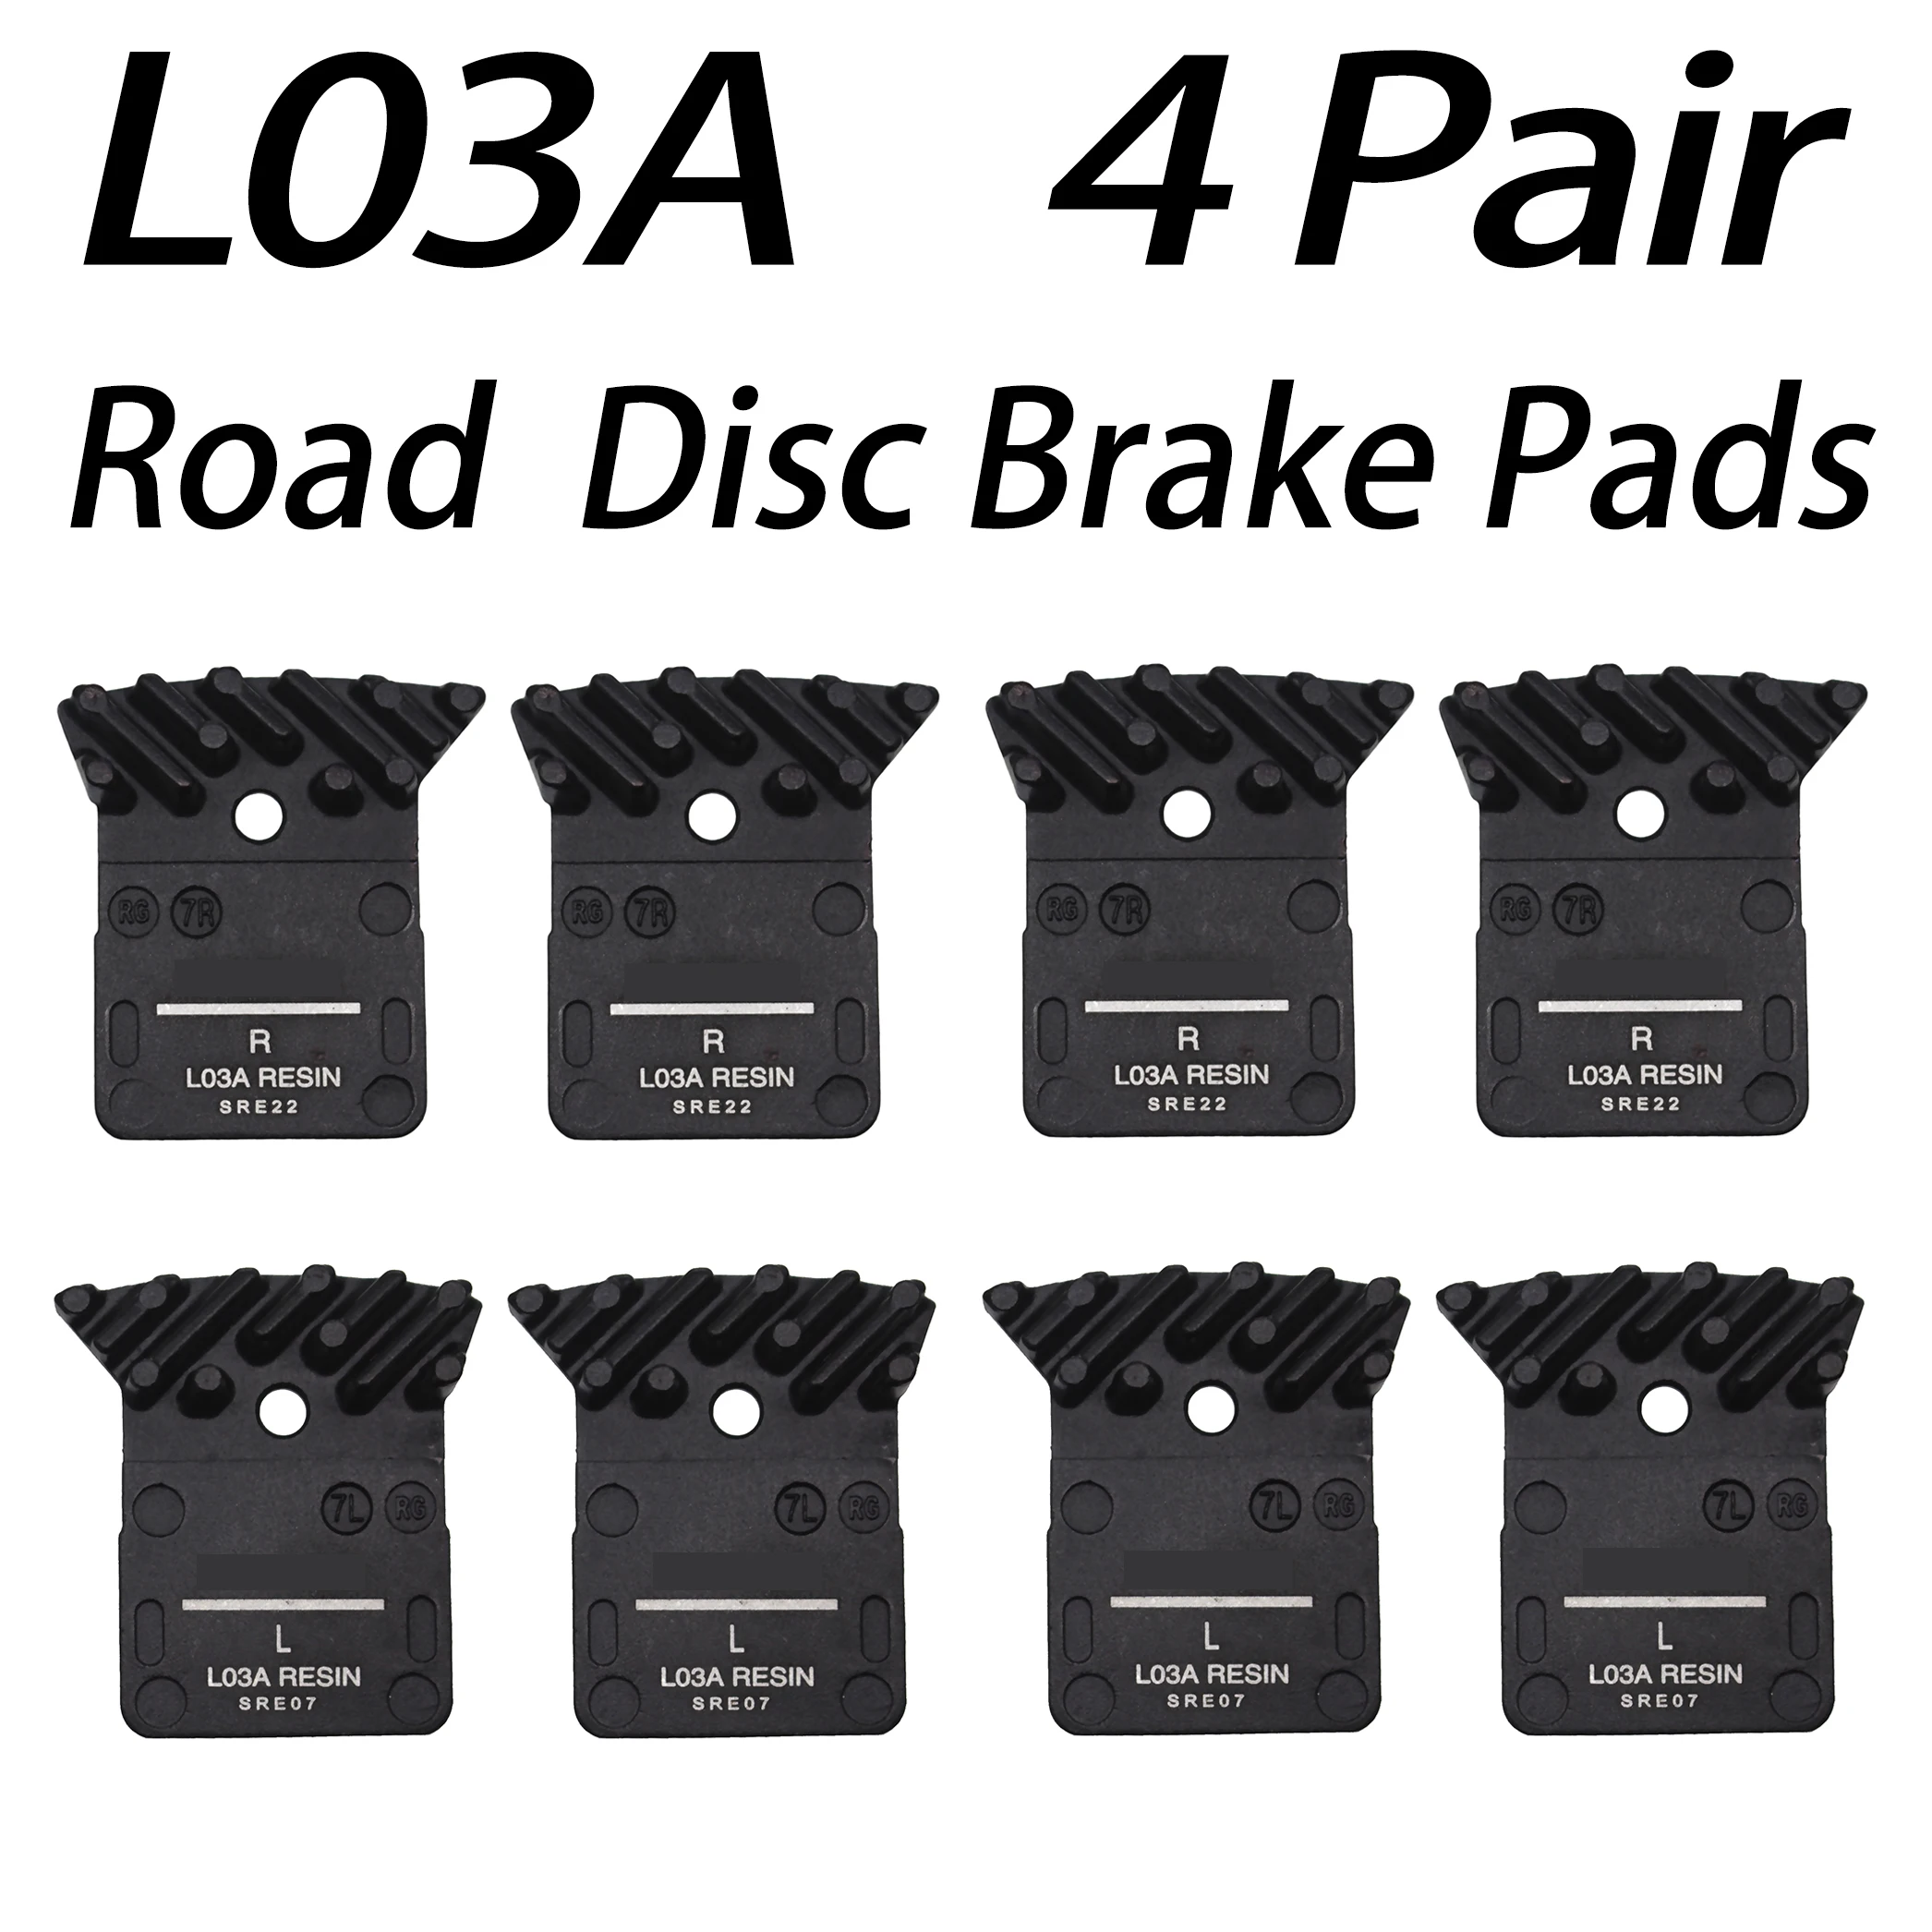 4 Pair Shimano L03A Brake Pads with Fin for Flat Mount Road Disc Caliper UP L02A